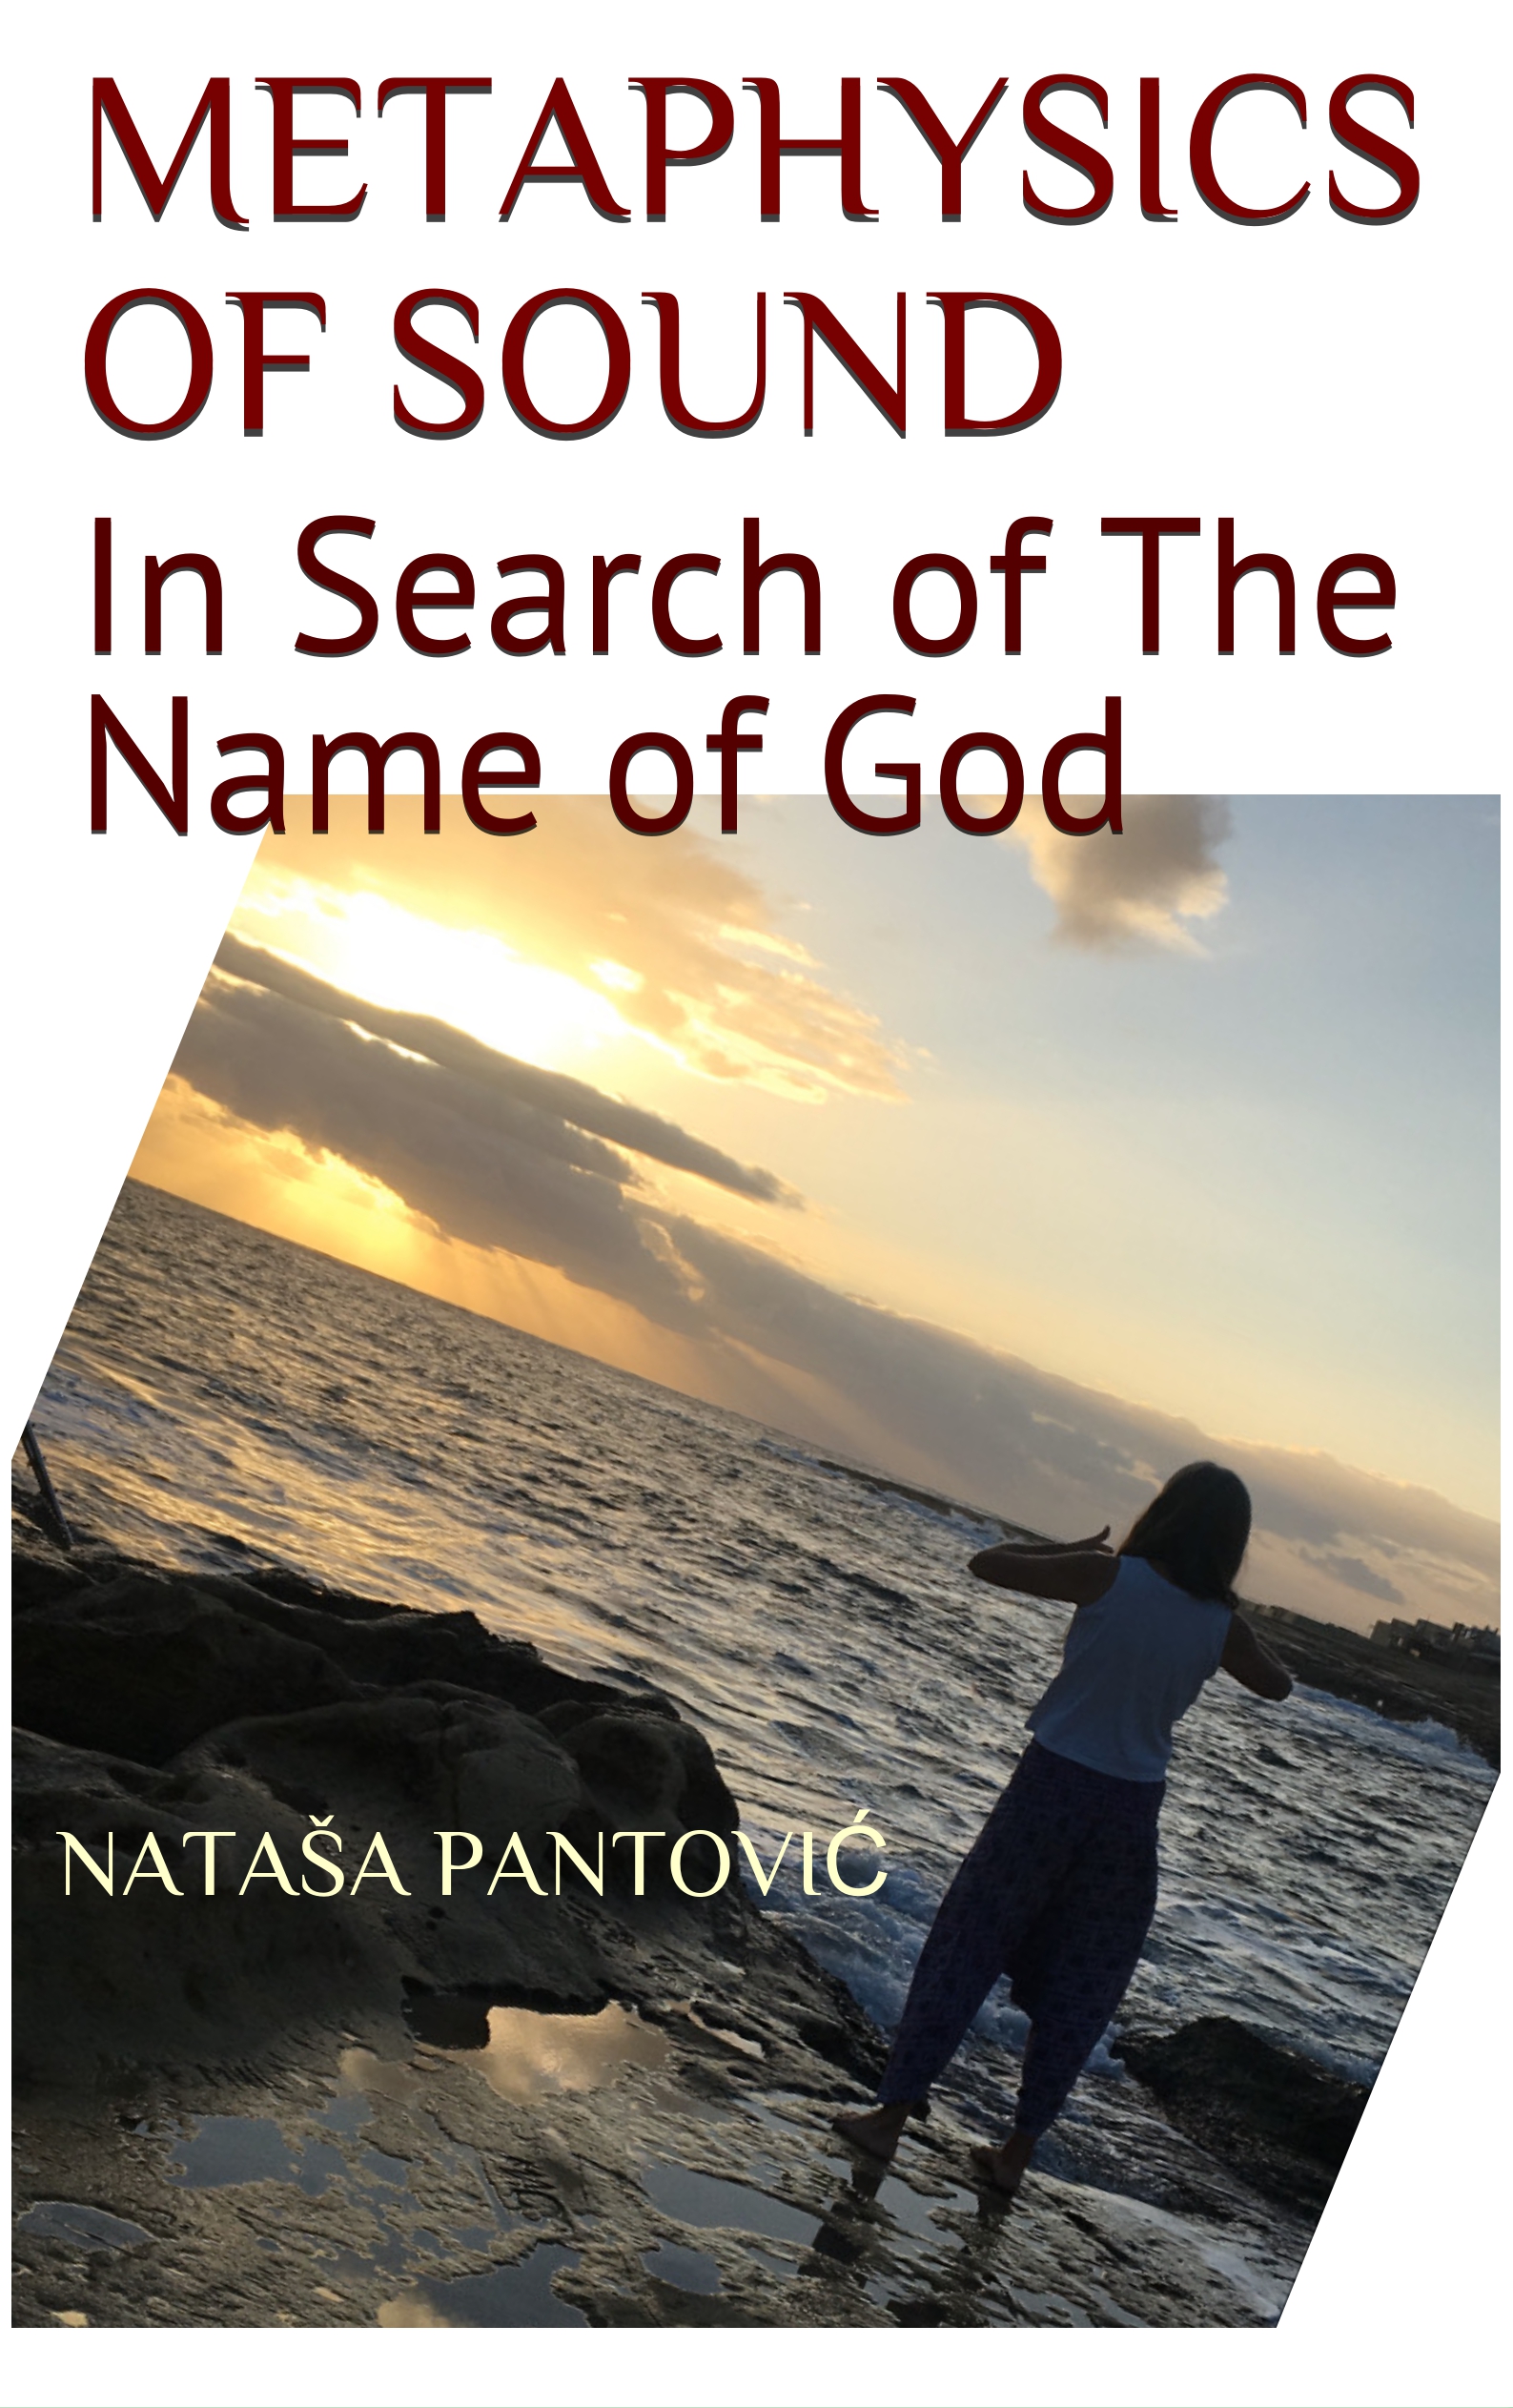 Metaphysics of Sound in search of the Name of God by Nataša Pantović